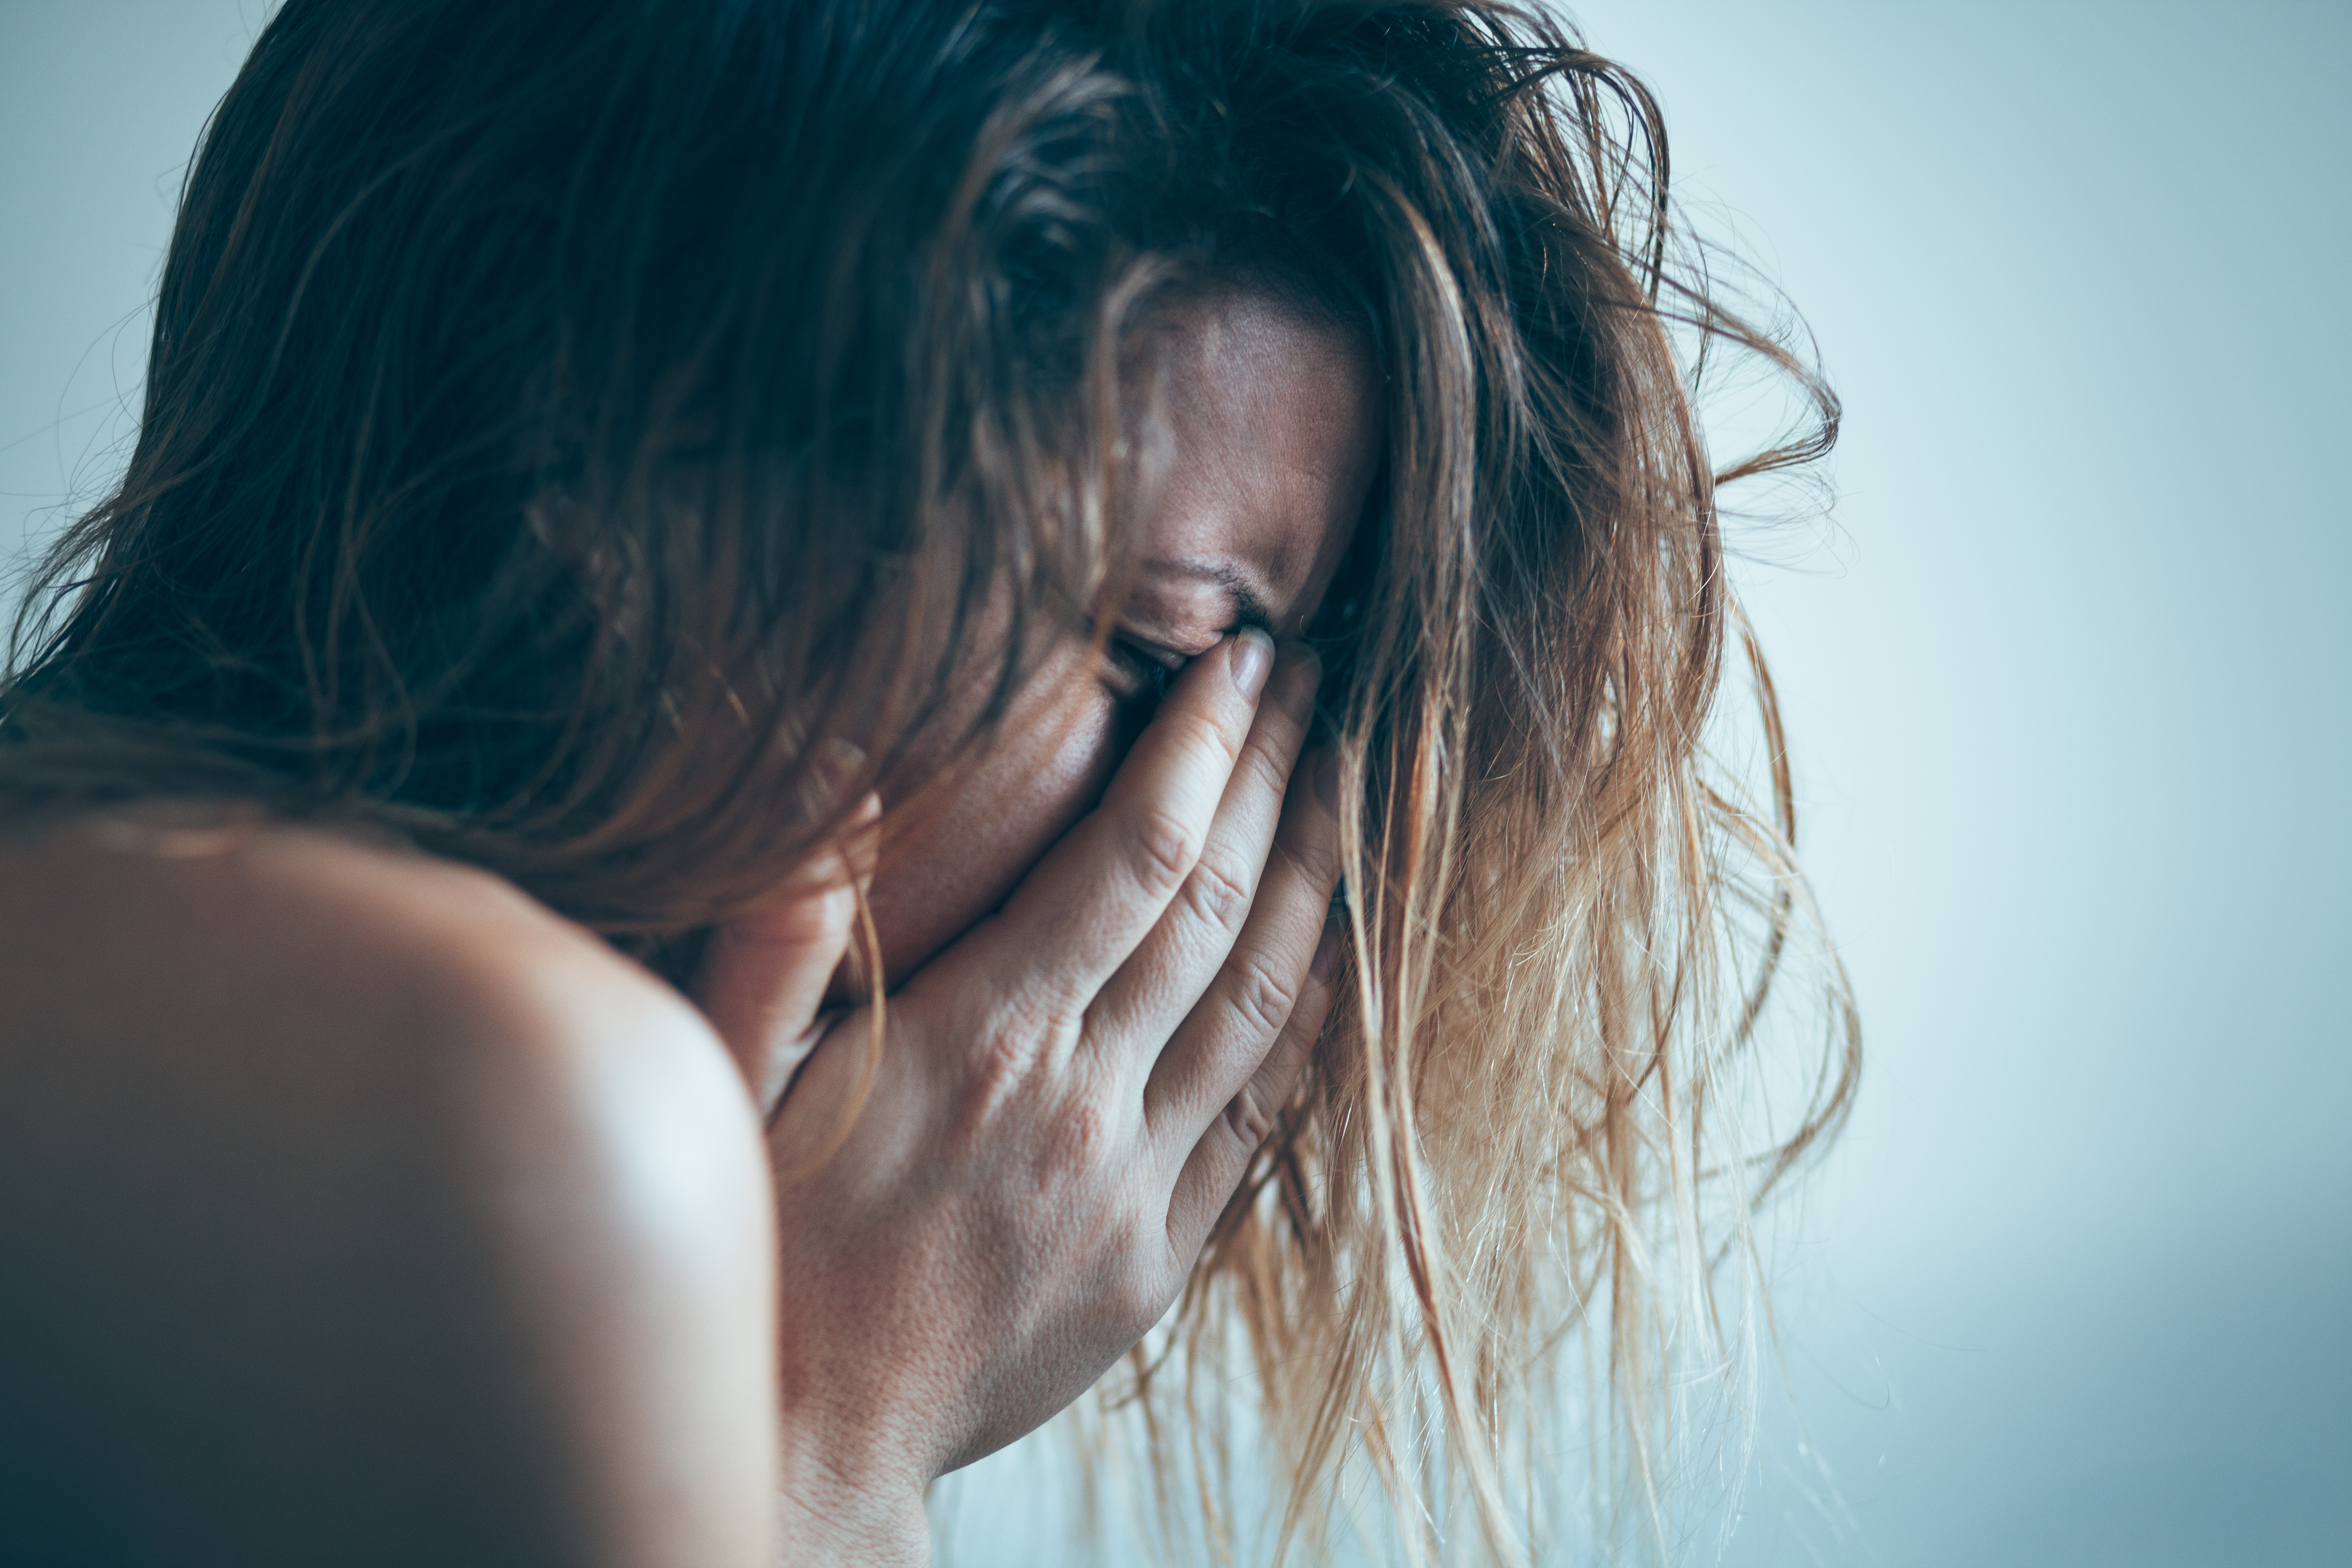 Young woman sad and crying | Source: Shutterstock